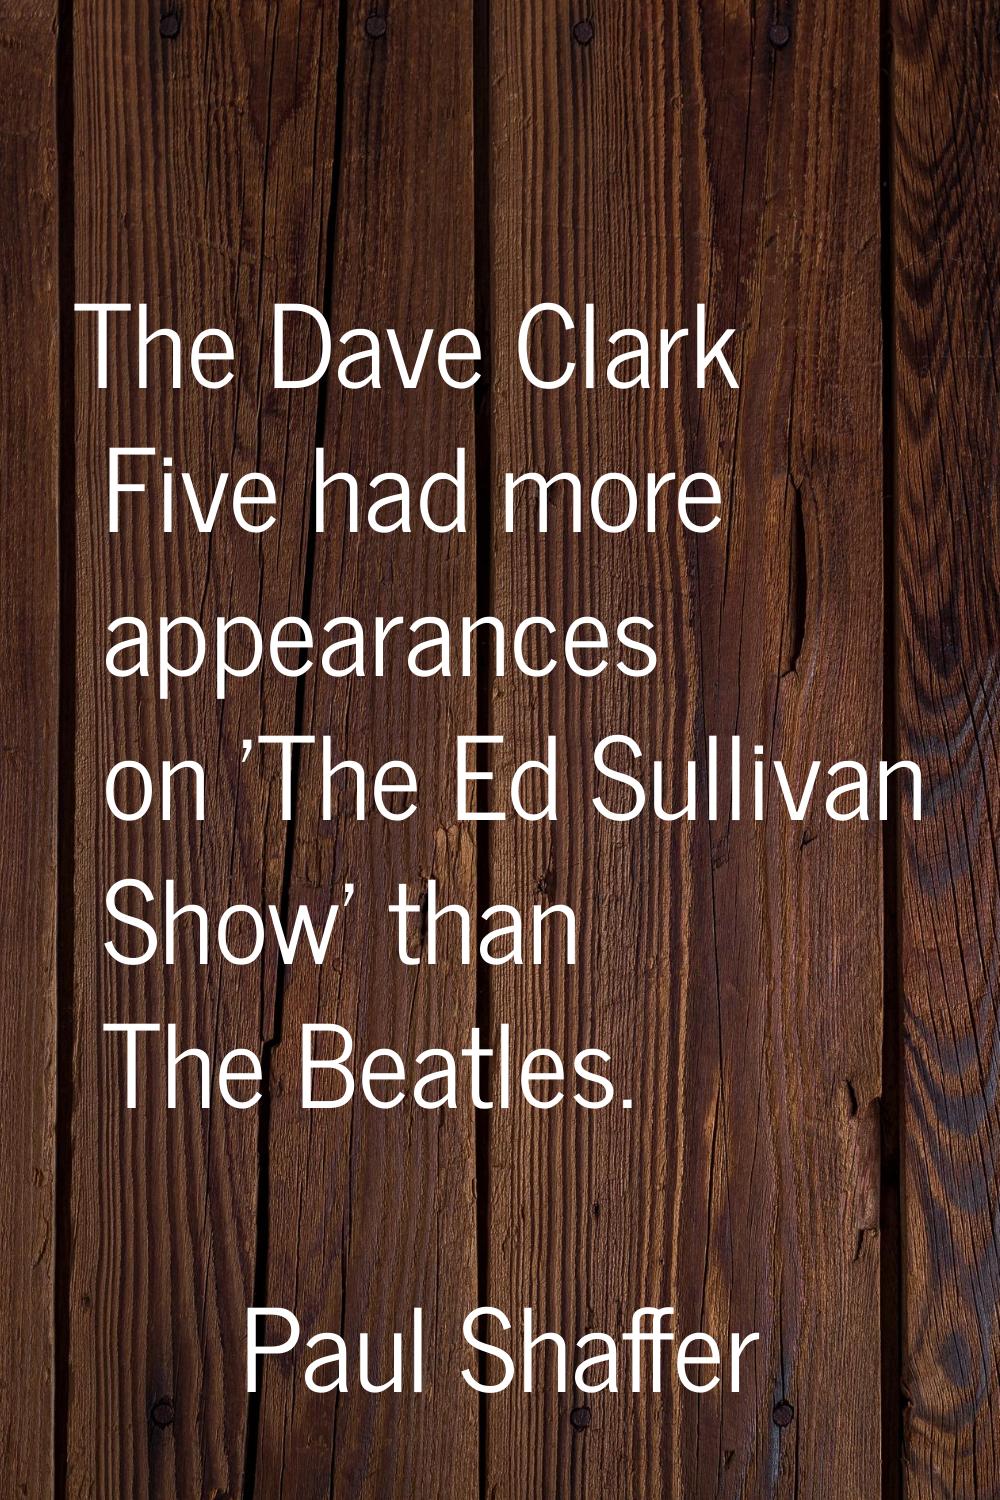 The Dave Clark Five had more appearances on 'The Ed Sullivan Show' than The Beatles.